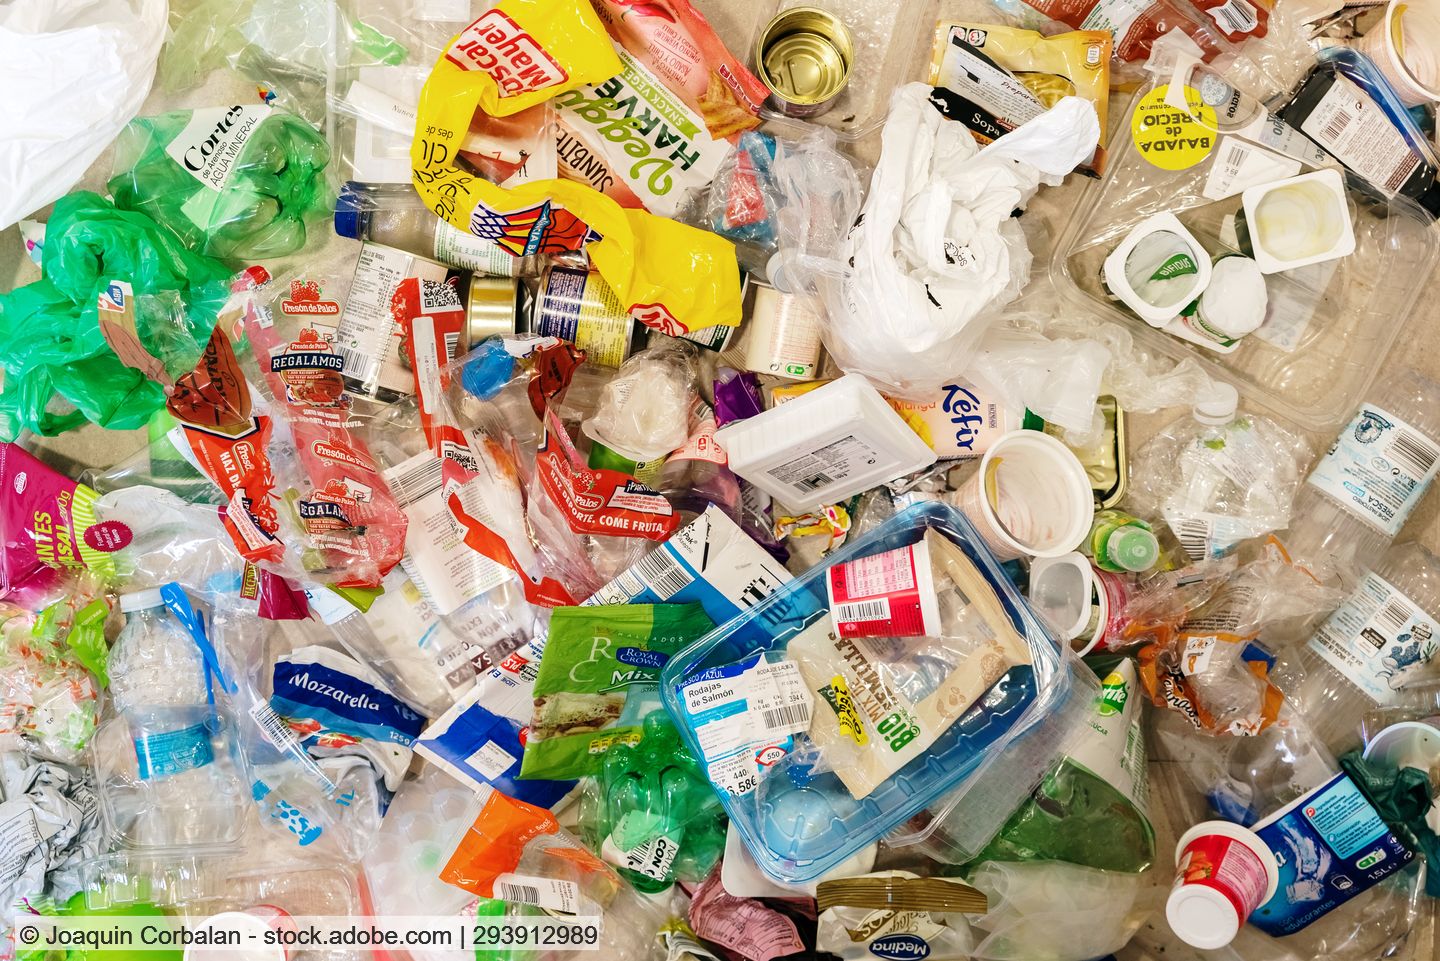 Wrappers, yogurt tubs and other mixed plastic packaging waste